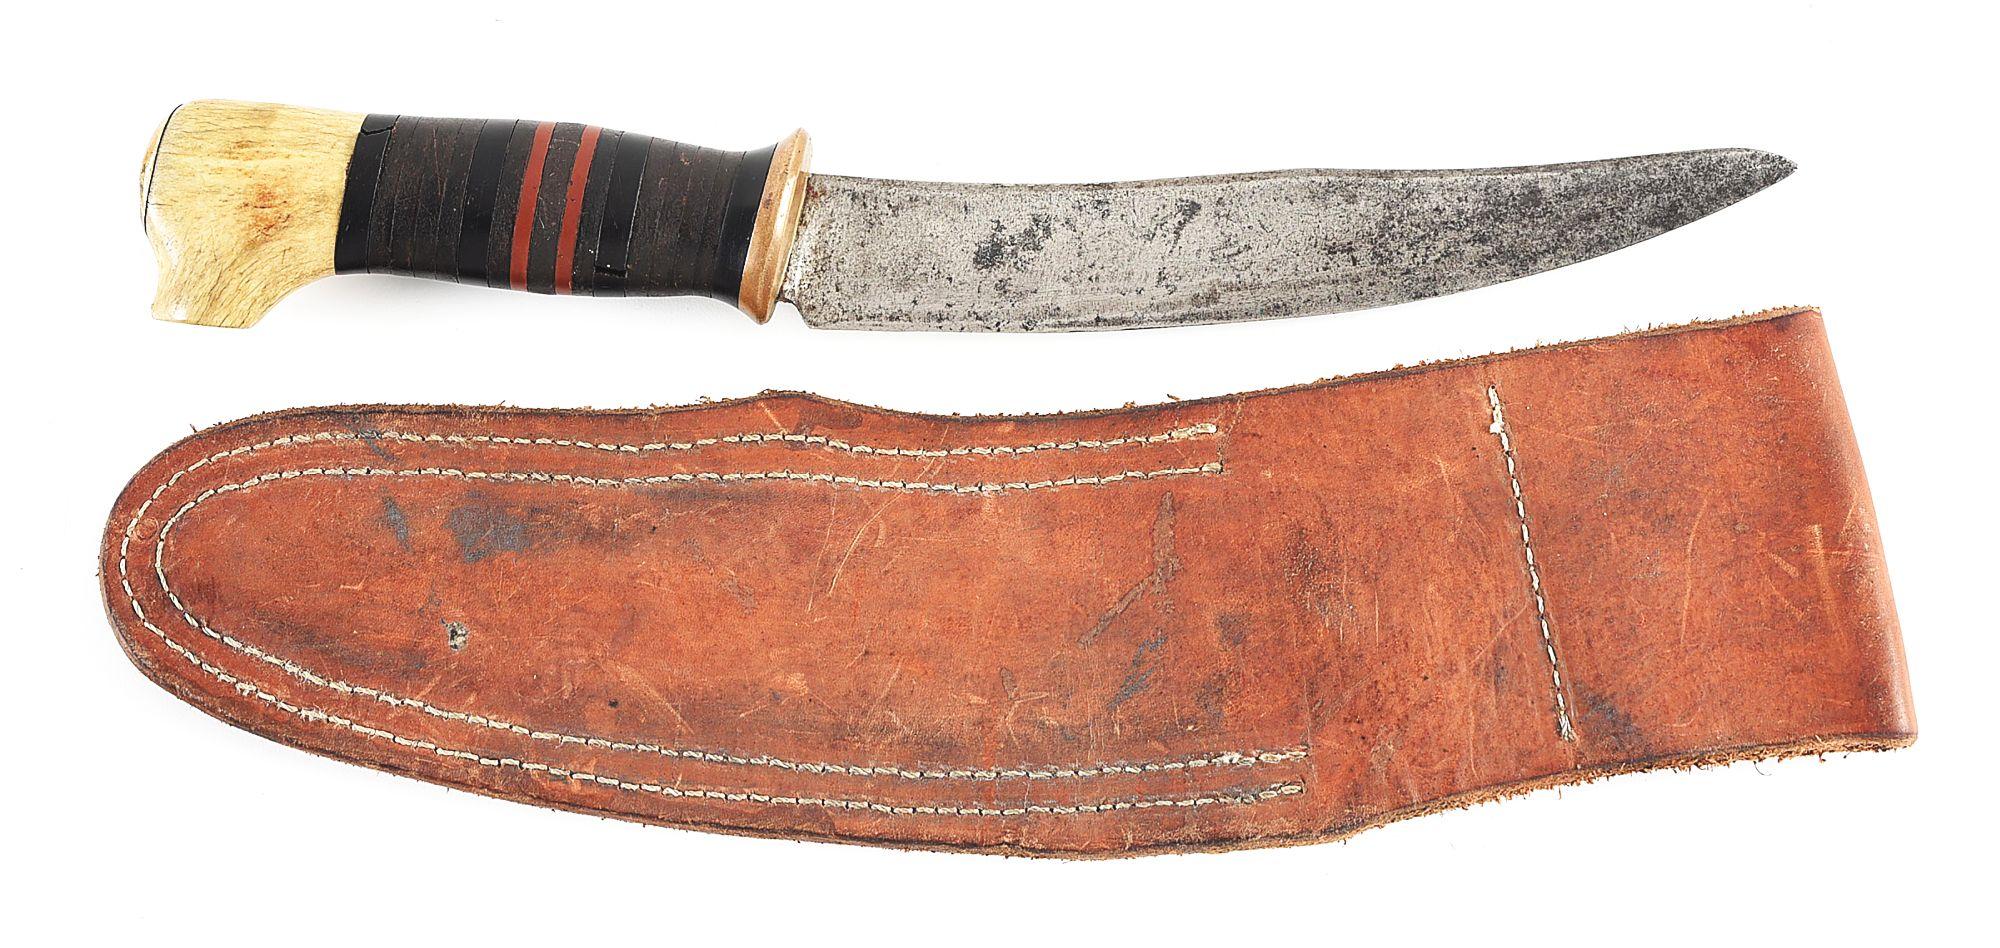 RARE LARGE BILL SCAGEL MADE BOWIE STYLE KNIFE WITH LEATHER SCABBARD.